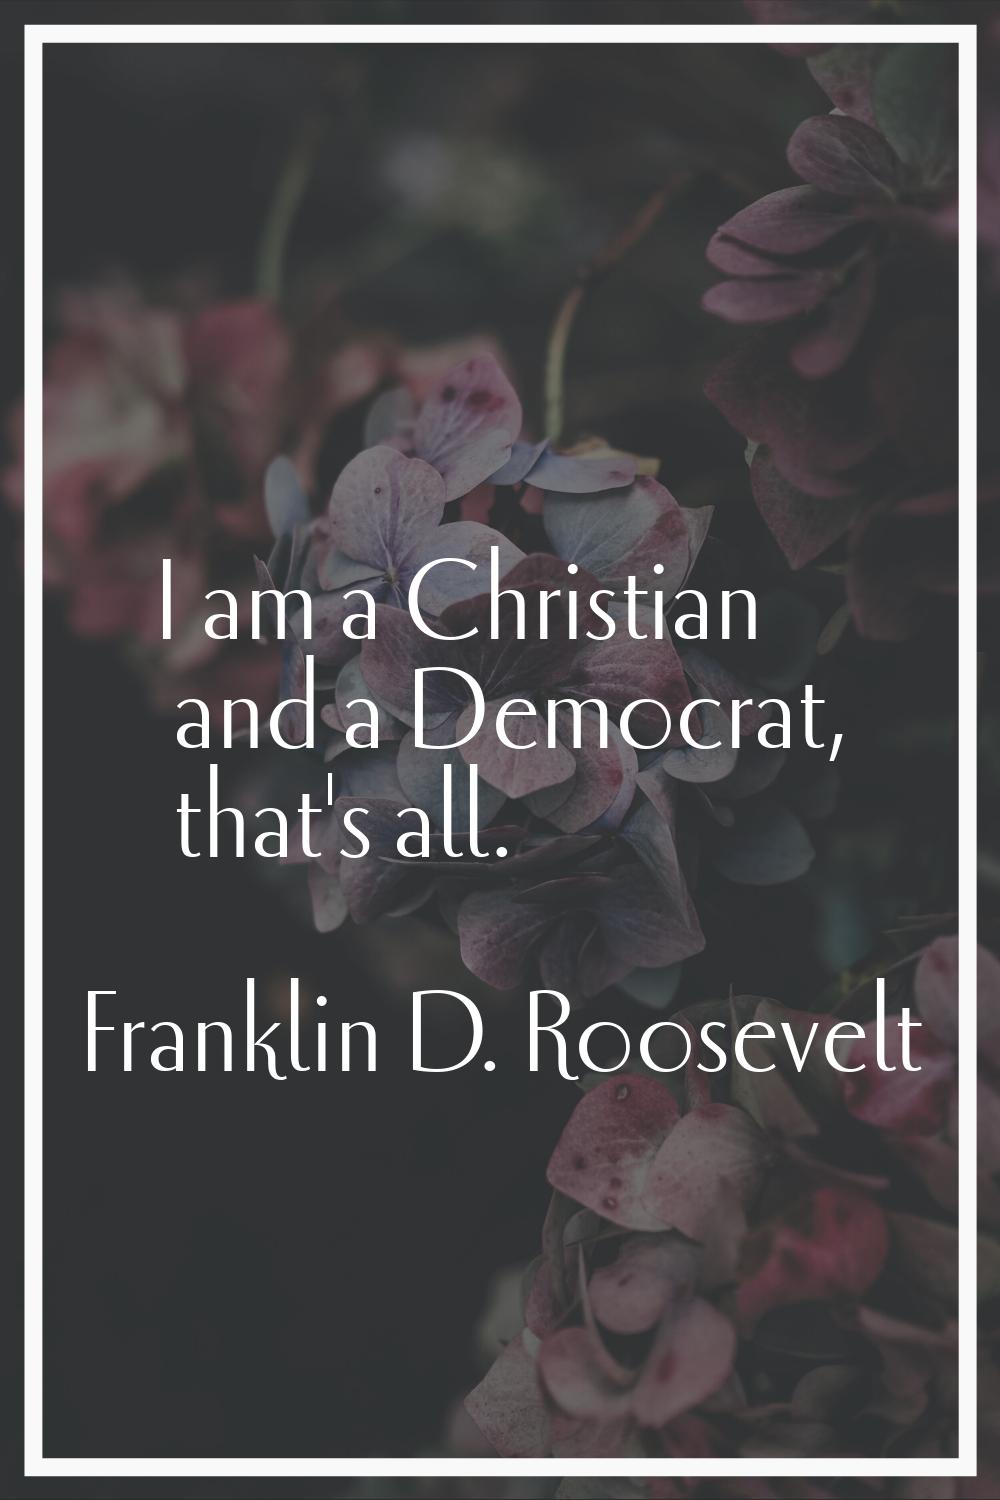 I am a Christian and a Democrat, that's all.